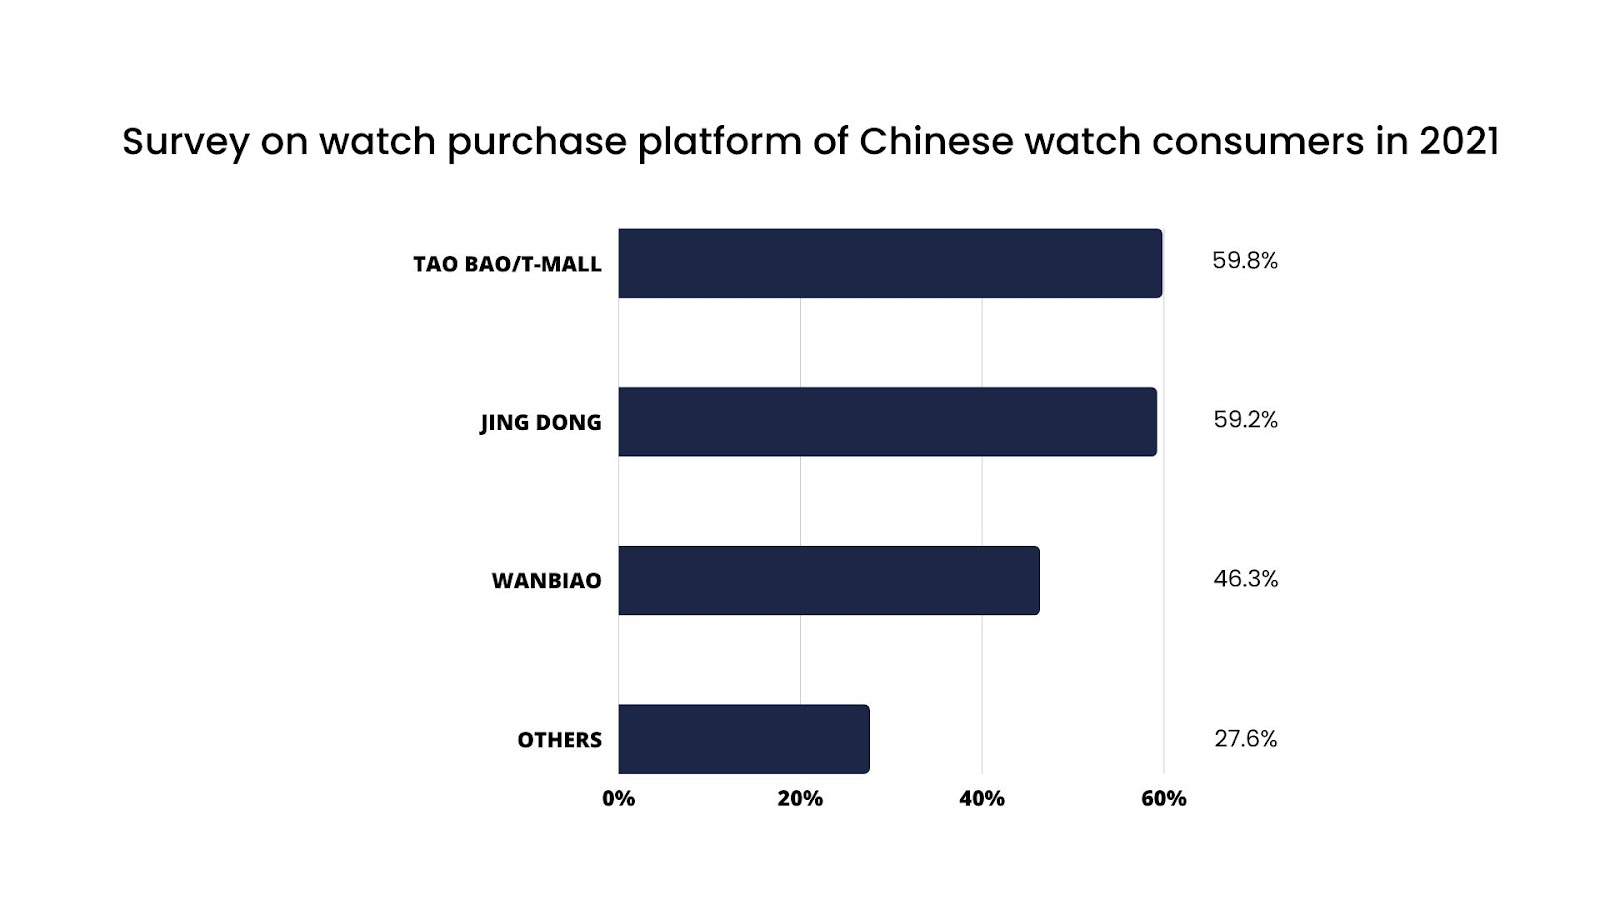 Table: survey on watch purchase platform of Chinese watch consumers in 2021